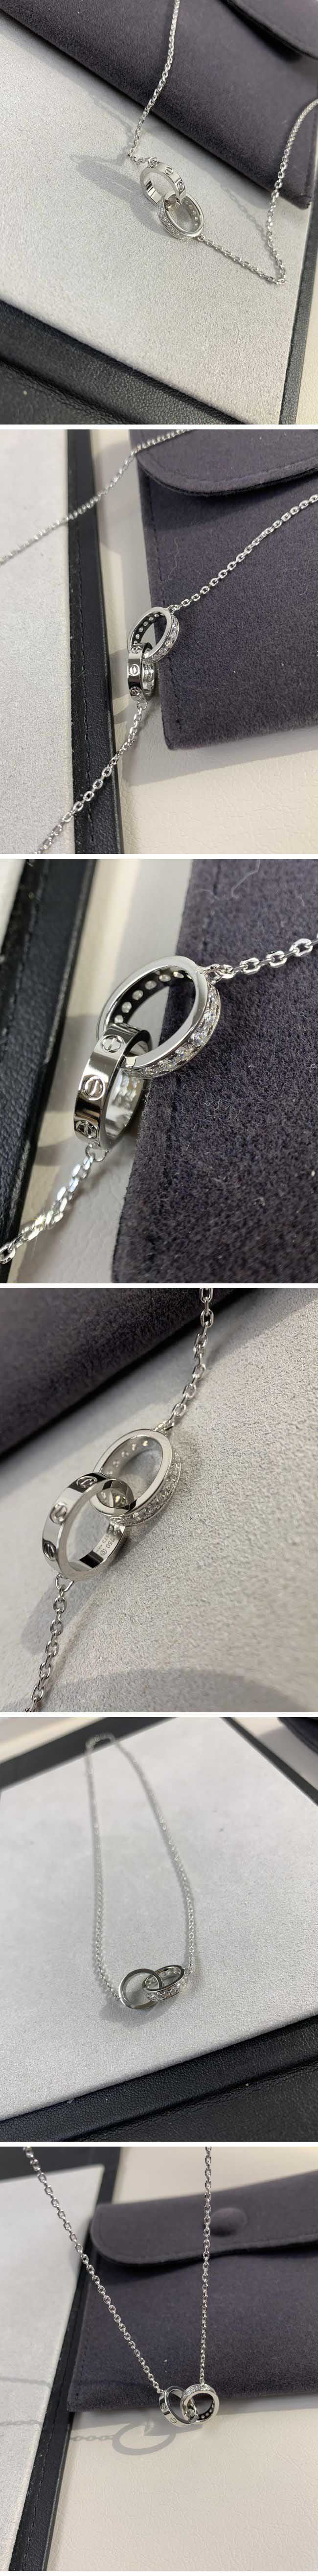 Cartier Double Love Ring Necklace カルティエ ダブル ラブ リング ネックレス